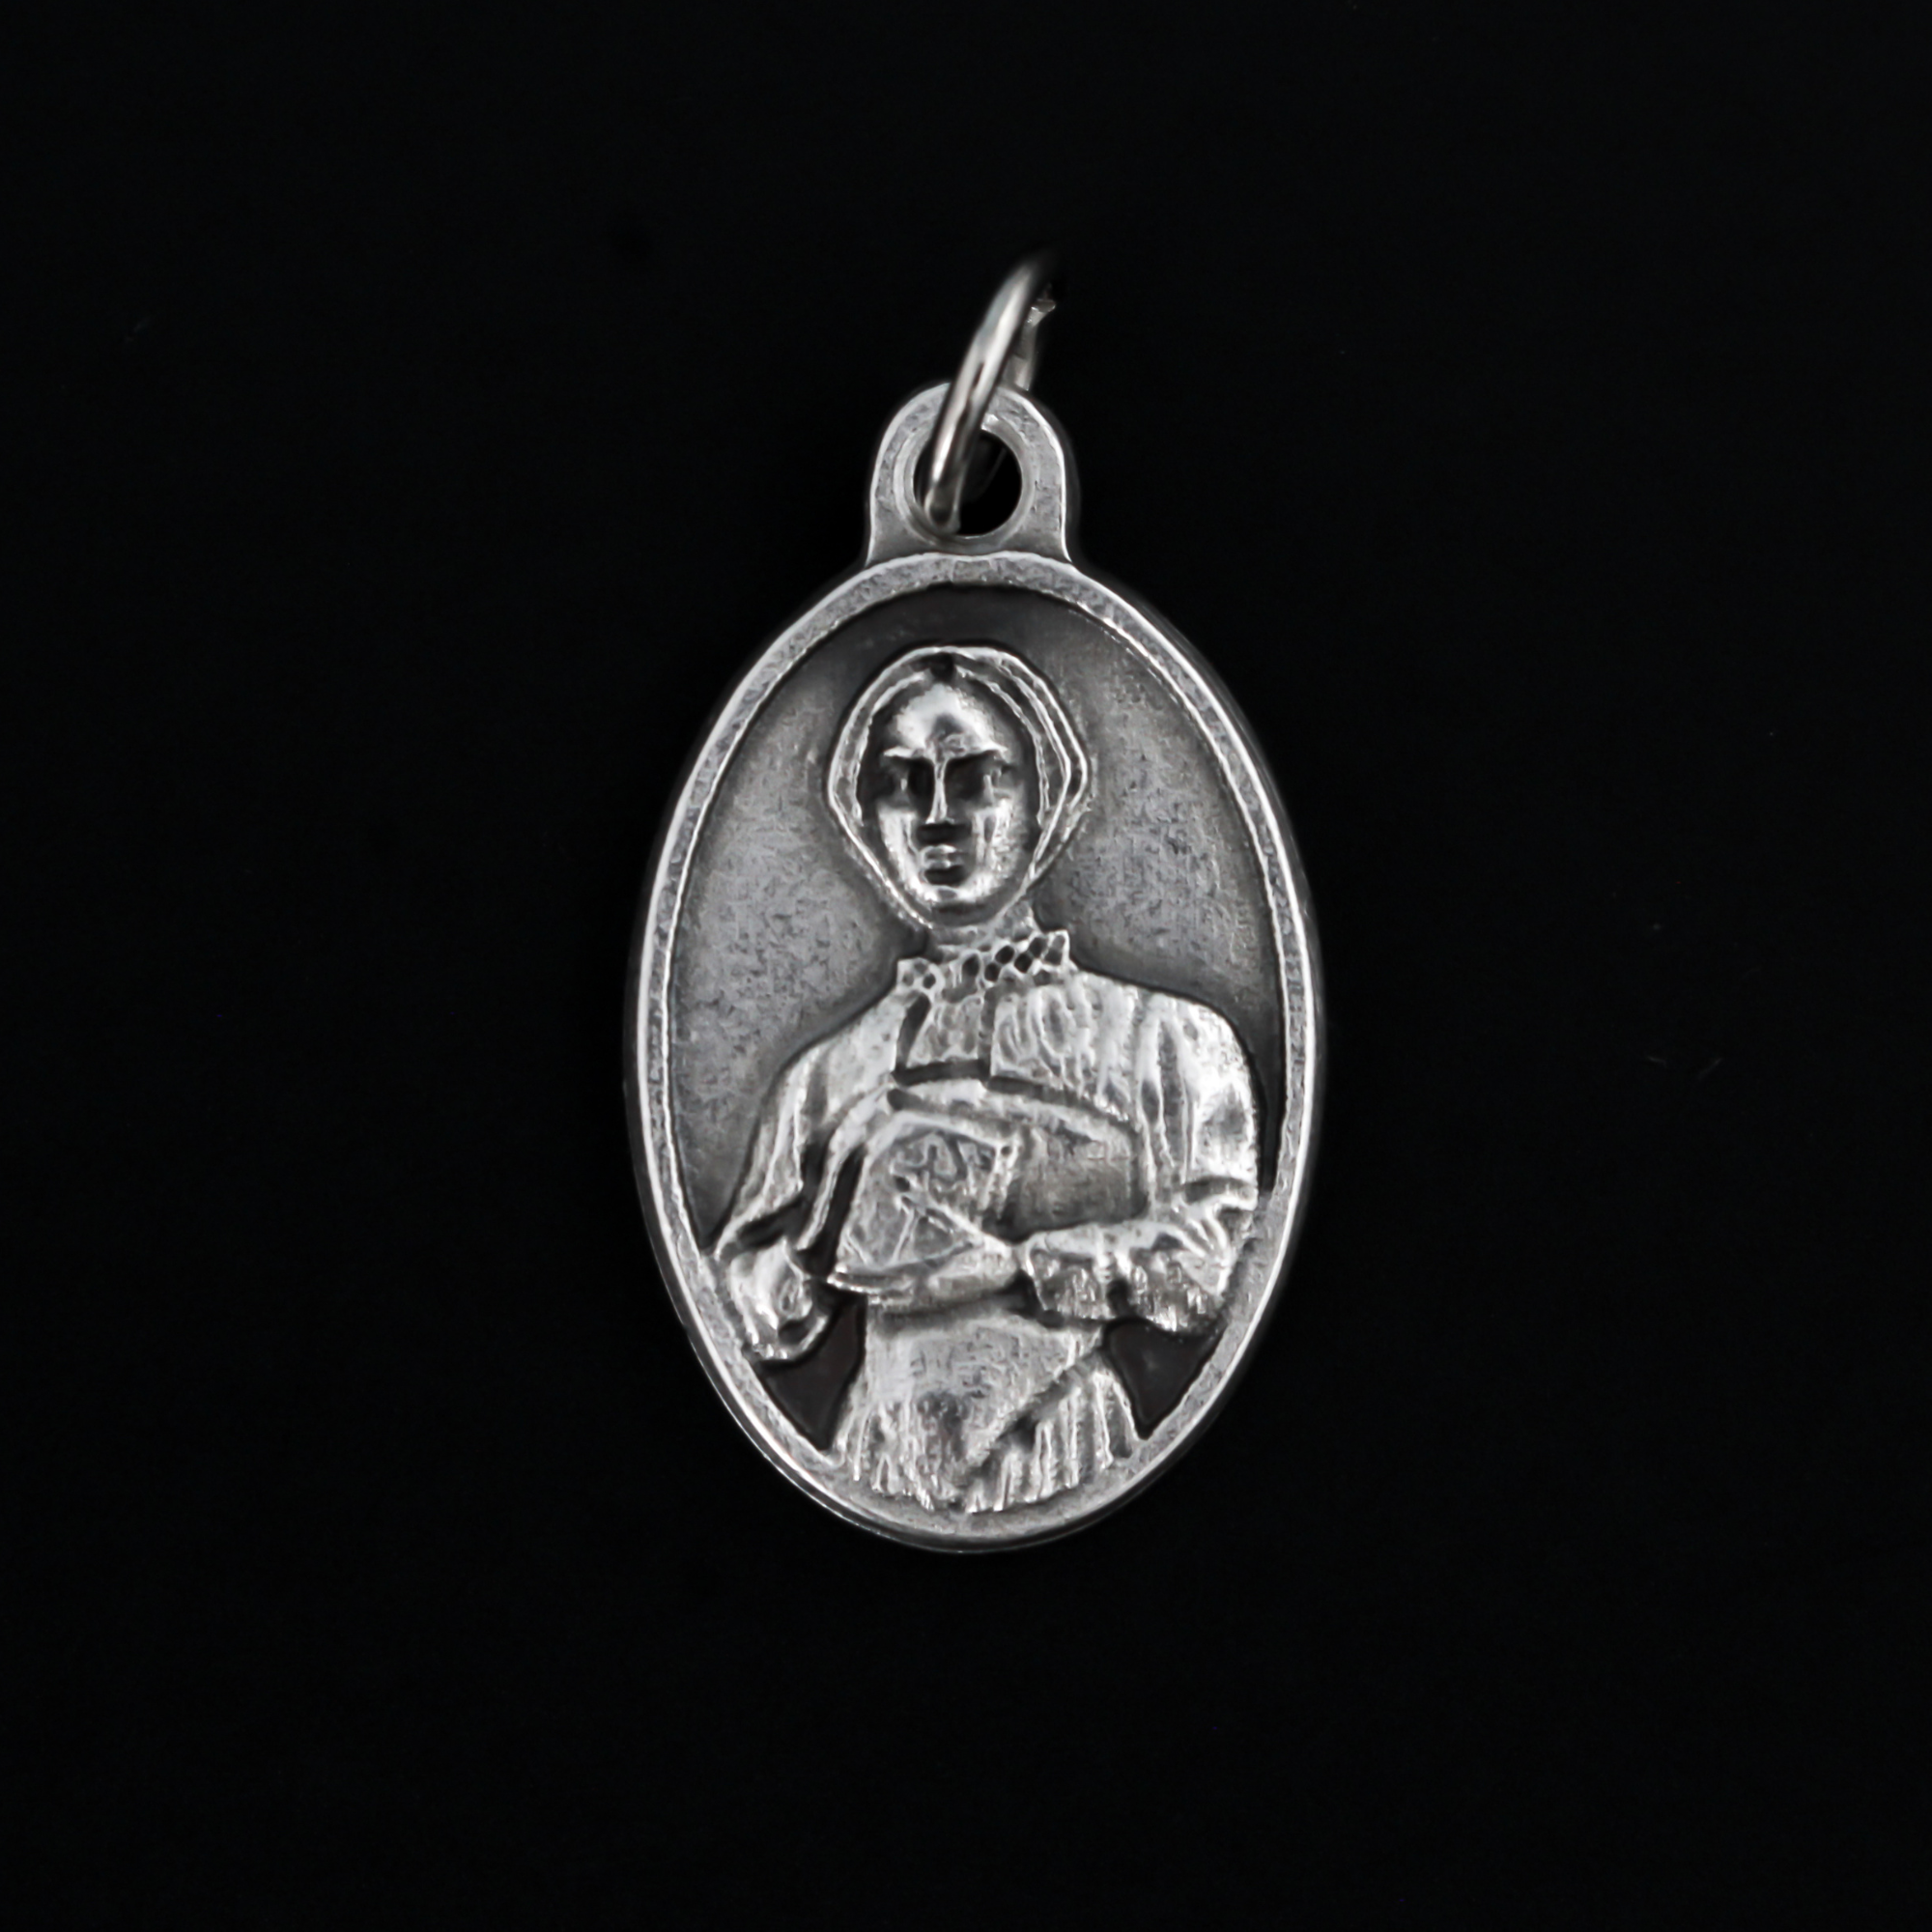 Saint Margaret Clitherow medal that depicts the saint on the front and is marked "Pray For Us" on the back